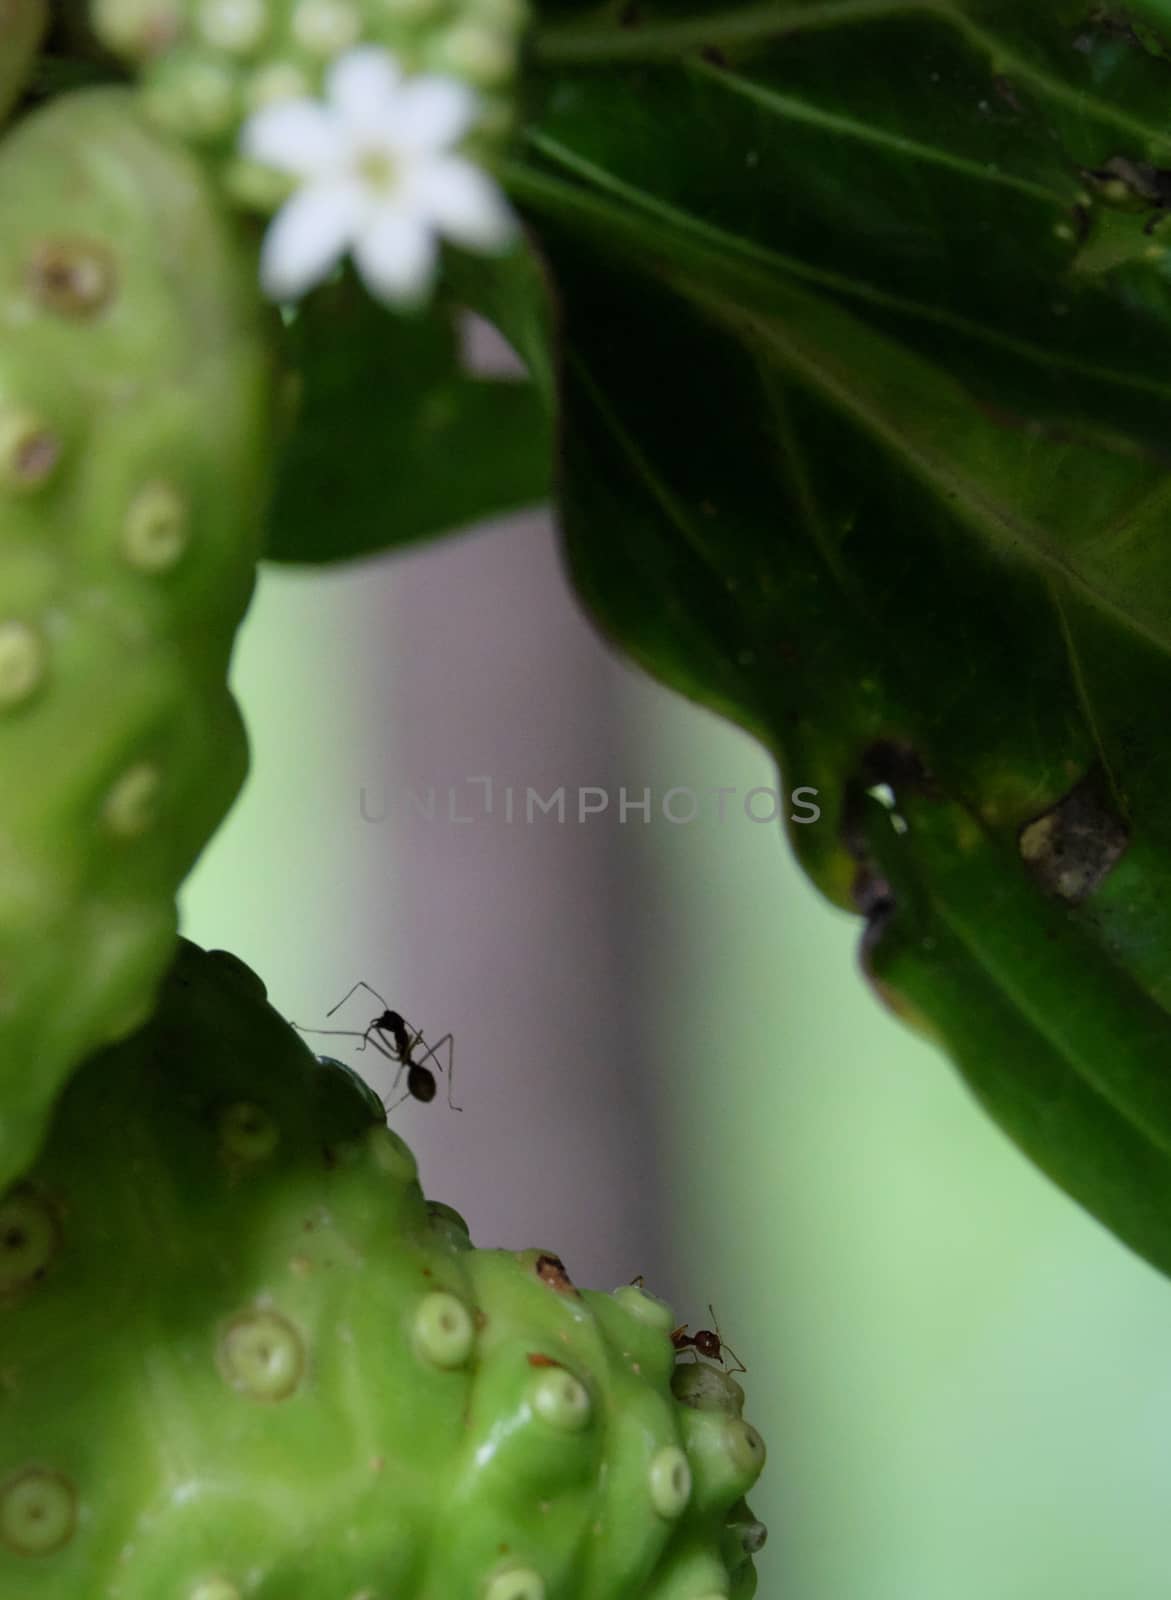 ant and tropical plant Noni or Indian Mulberry (Morinda. Citrifolia Linn)